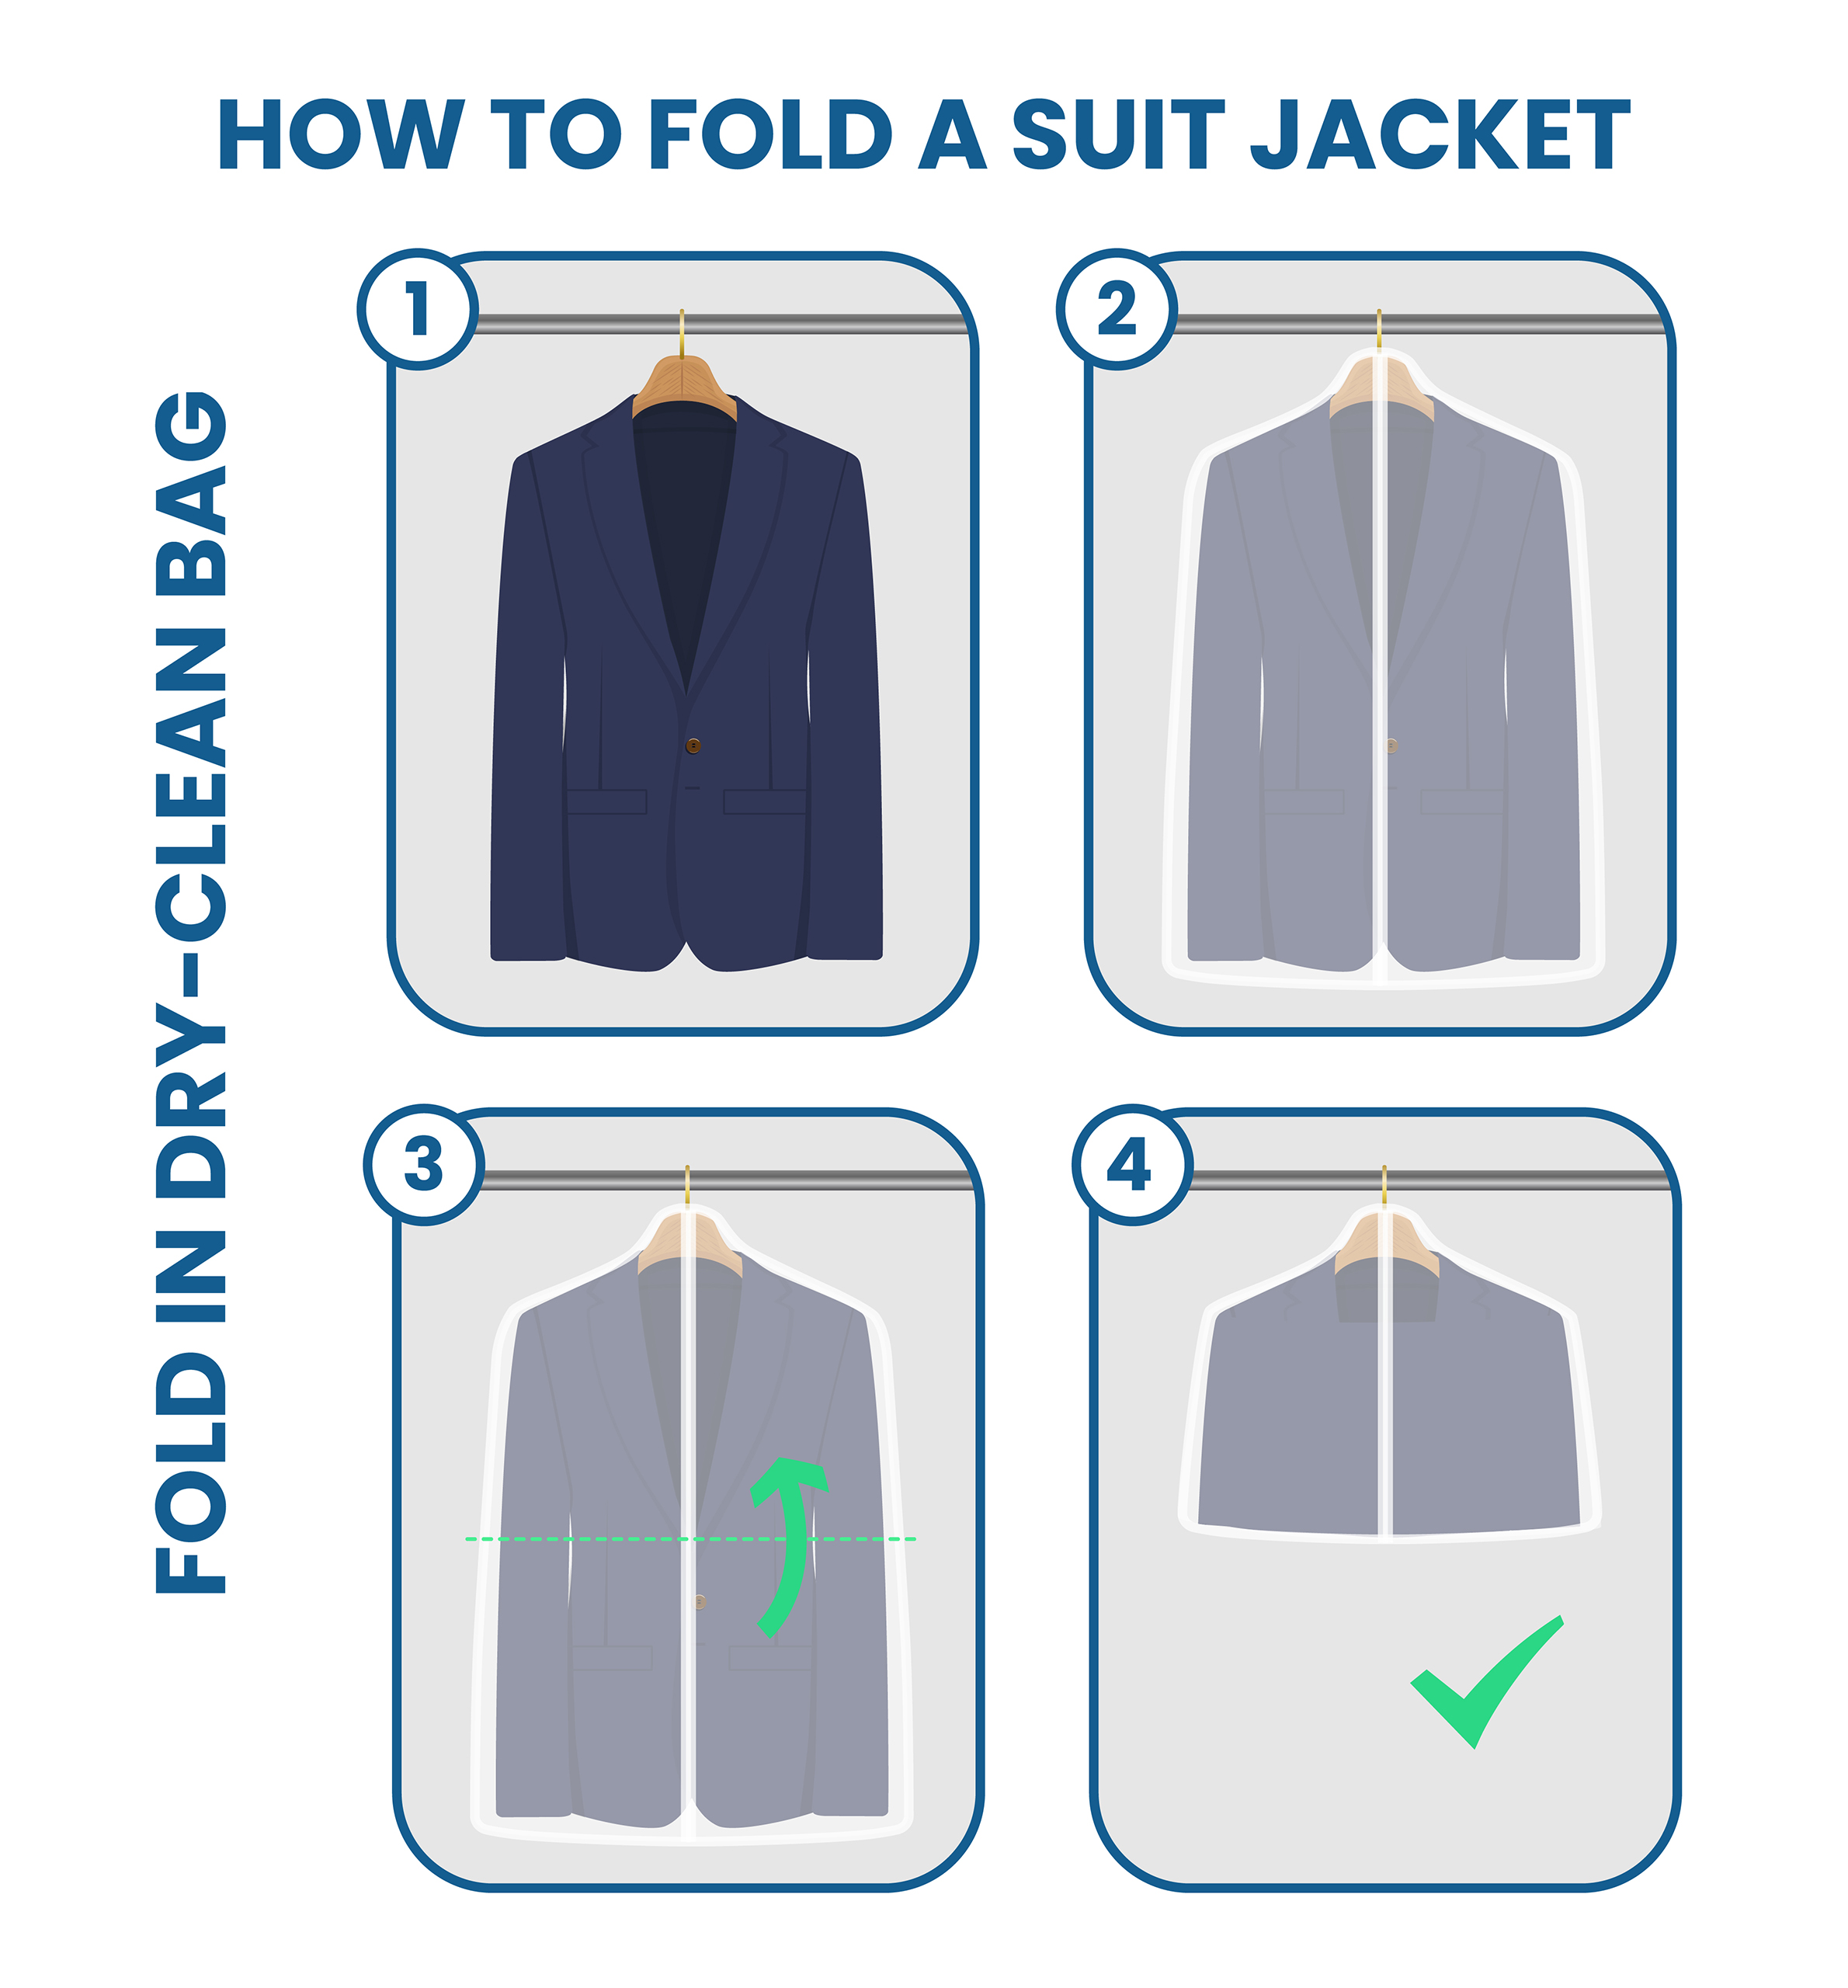 5 Easy Methods to Fold and Pack a Suit - Suits Expert